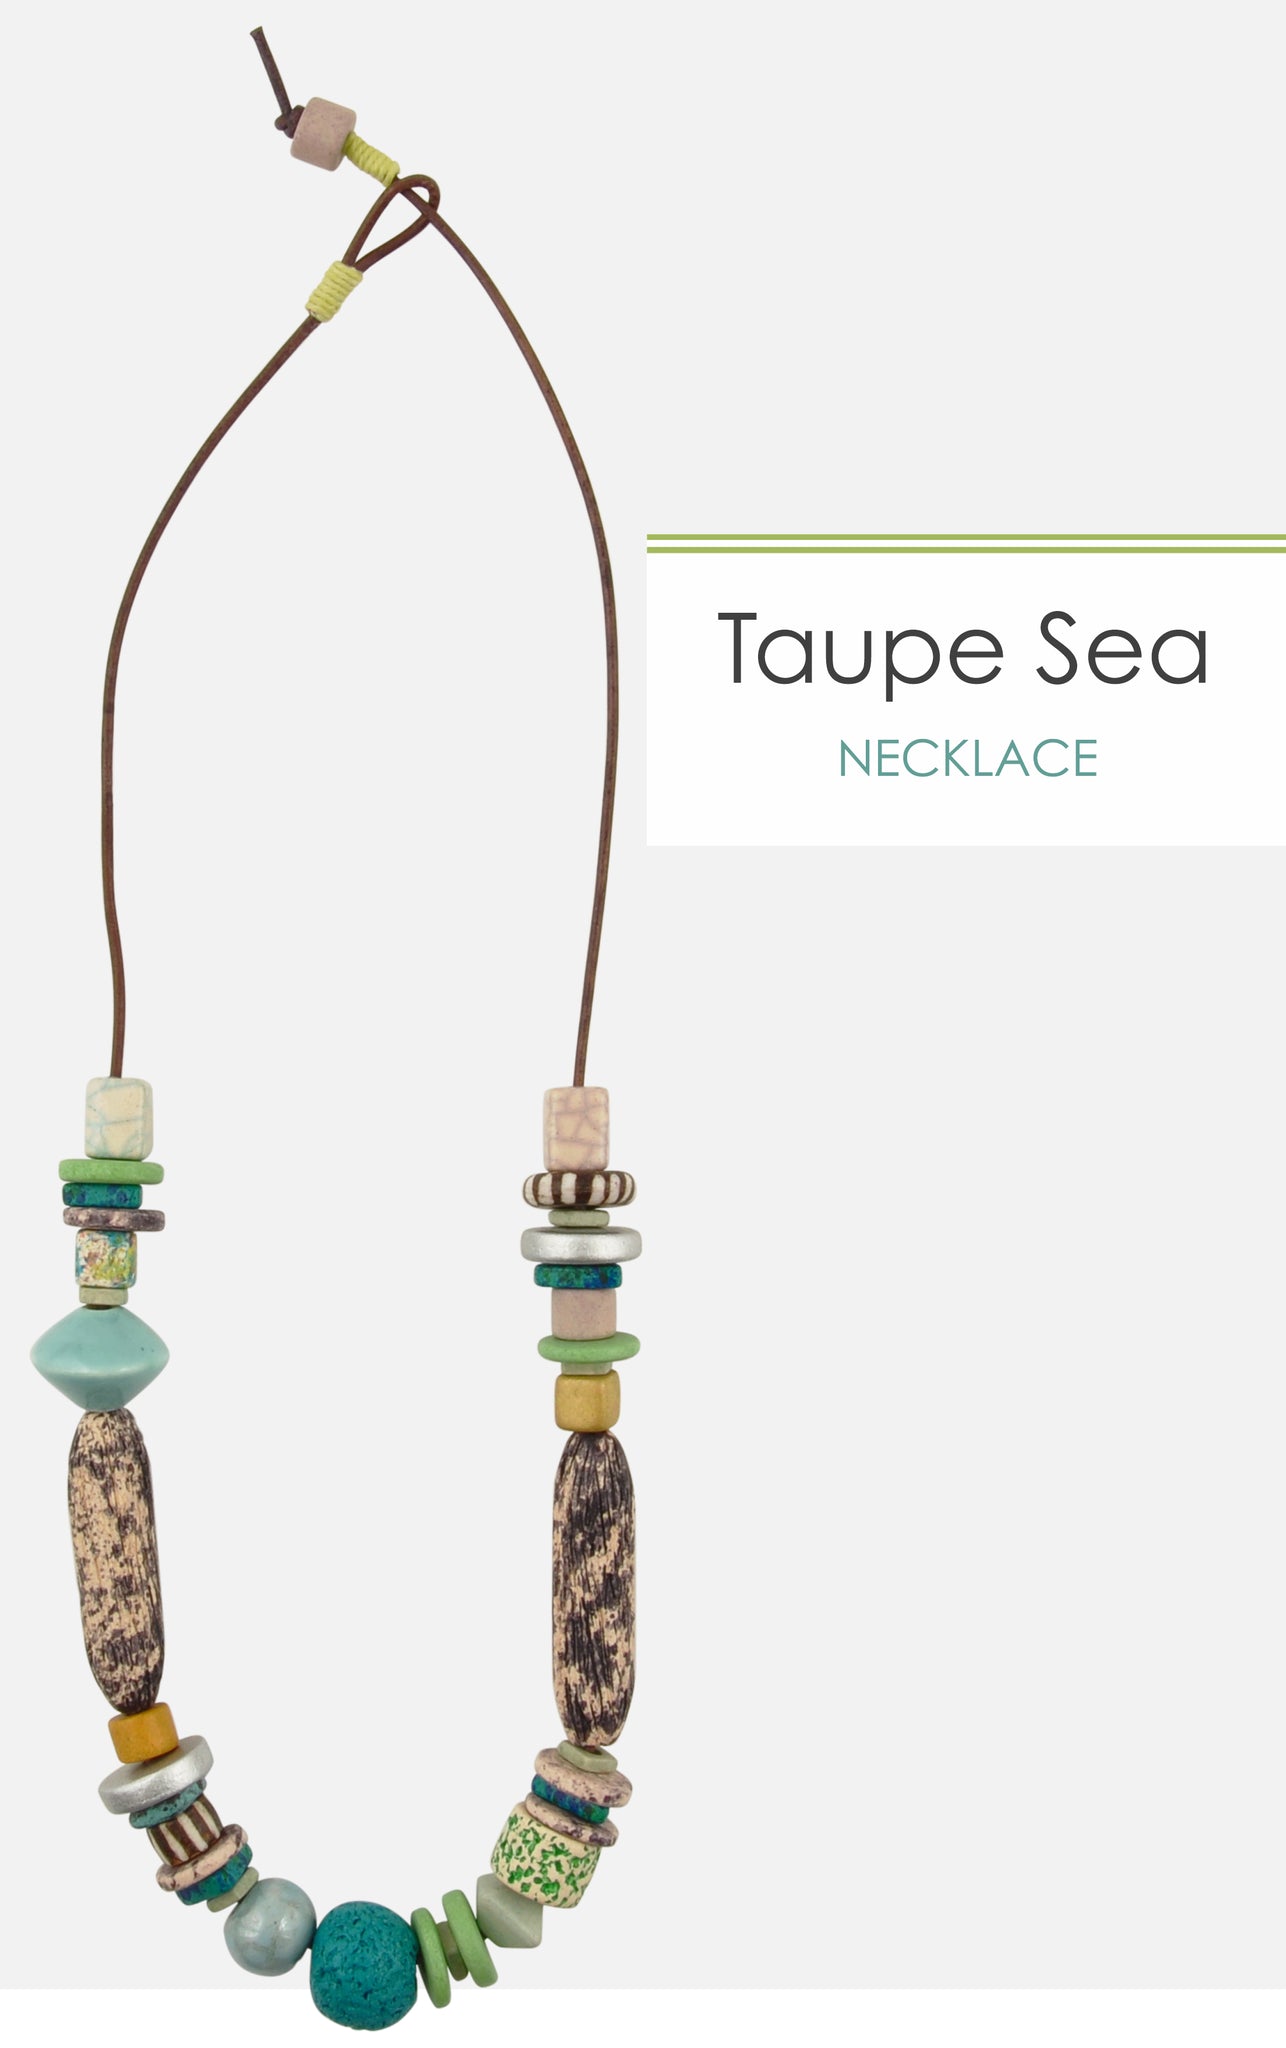 Taupe Sea Necklace Blog choiyeonhee